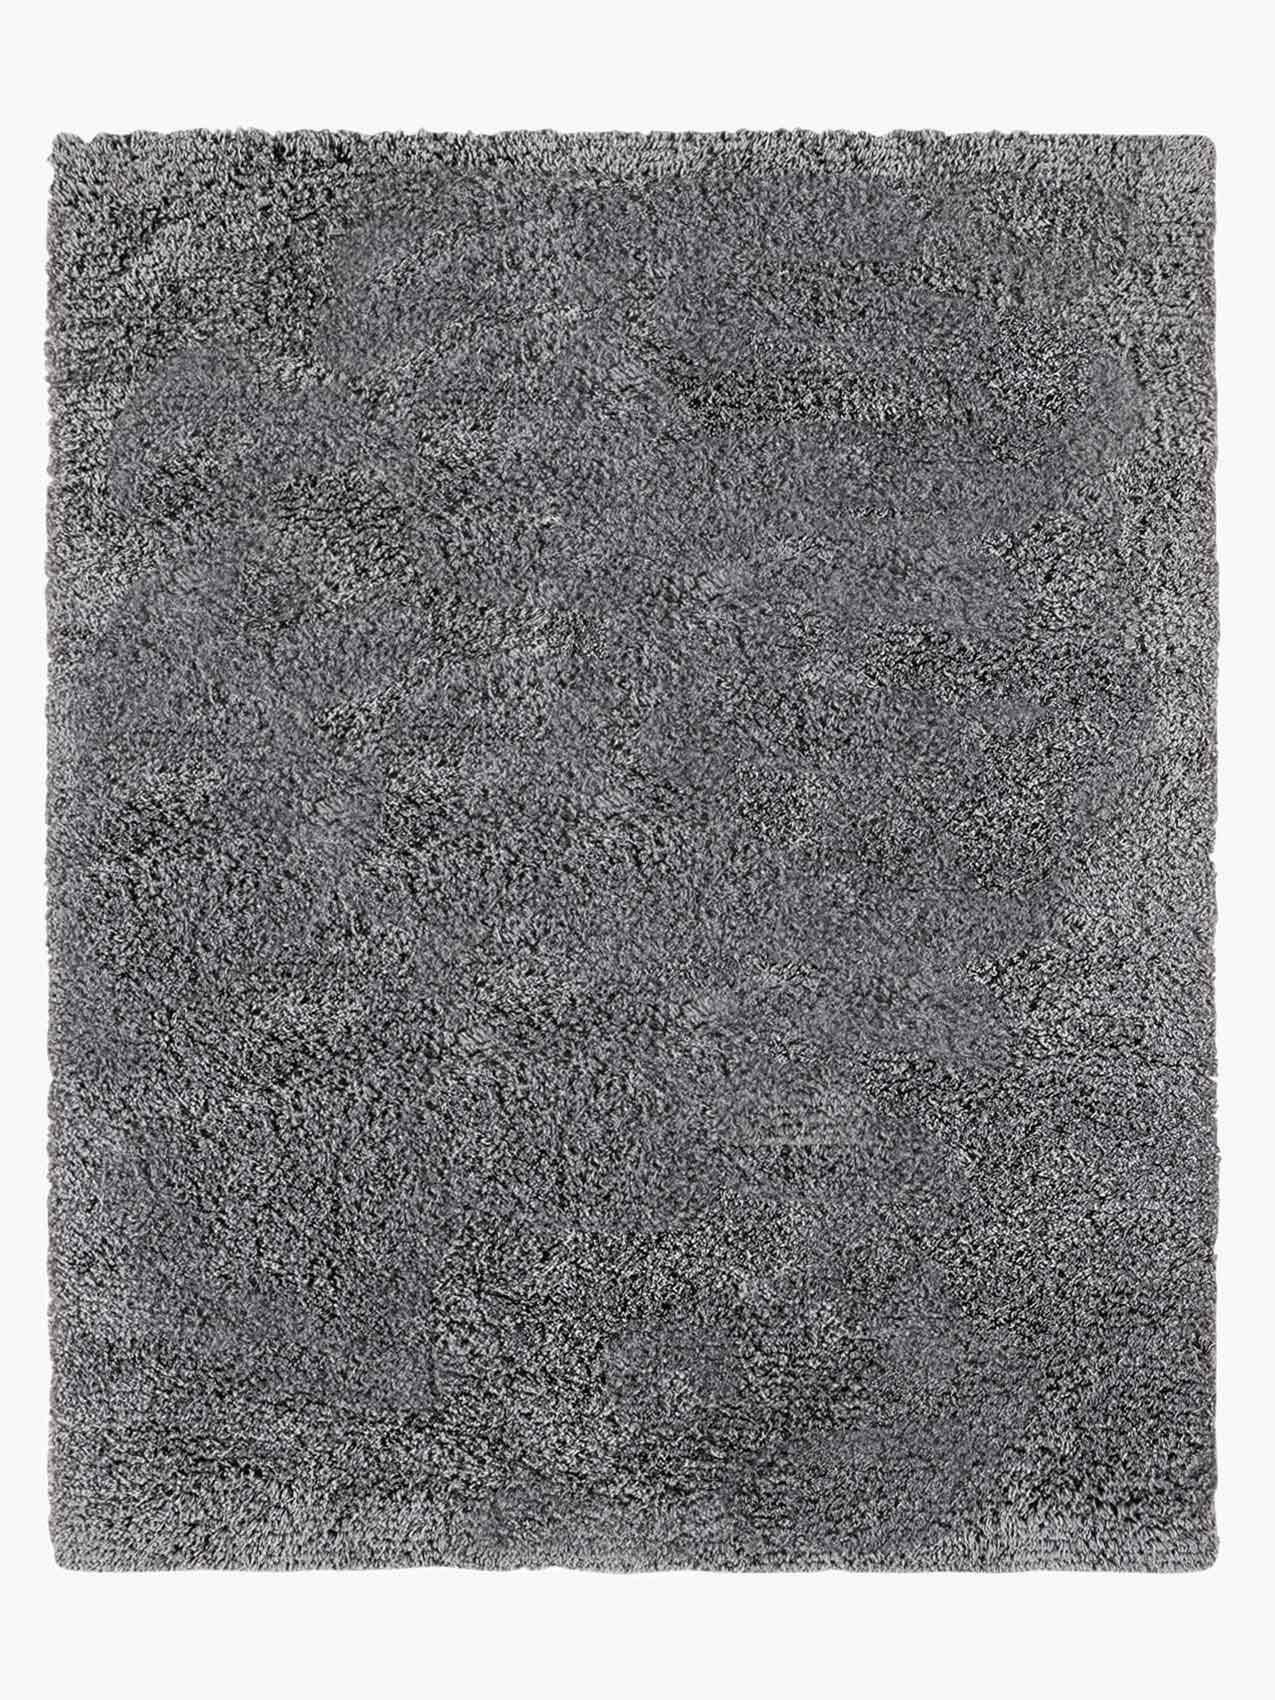 For Sale: Gray (Nickel/Carbon) Ben Soleimani Performance Shag Rug– Hand-woven Ultra-plush 8'x10'